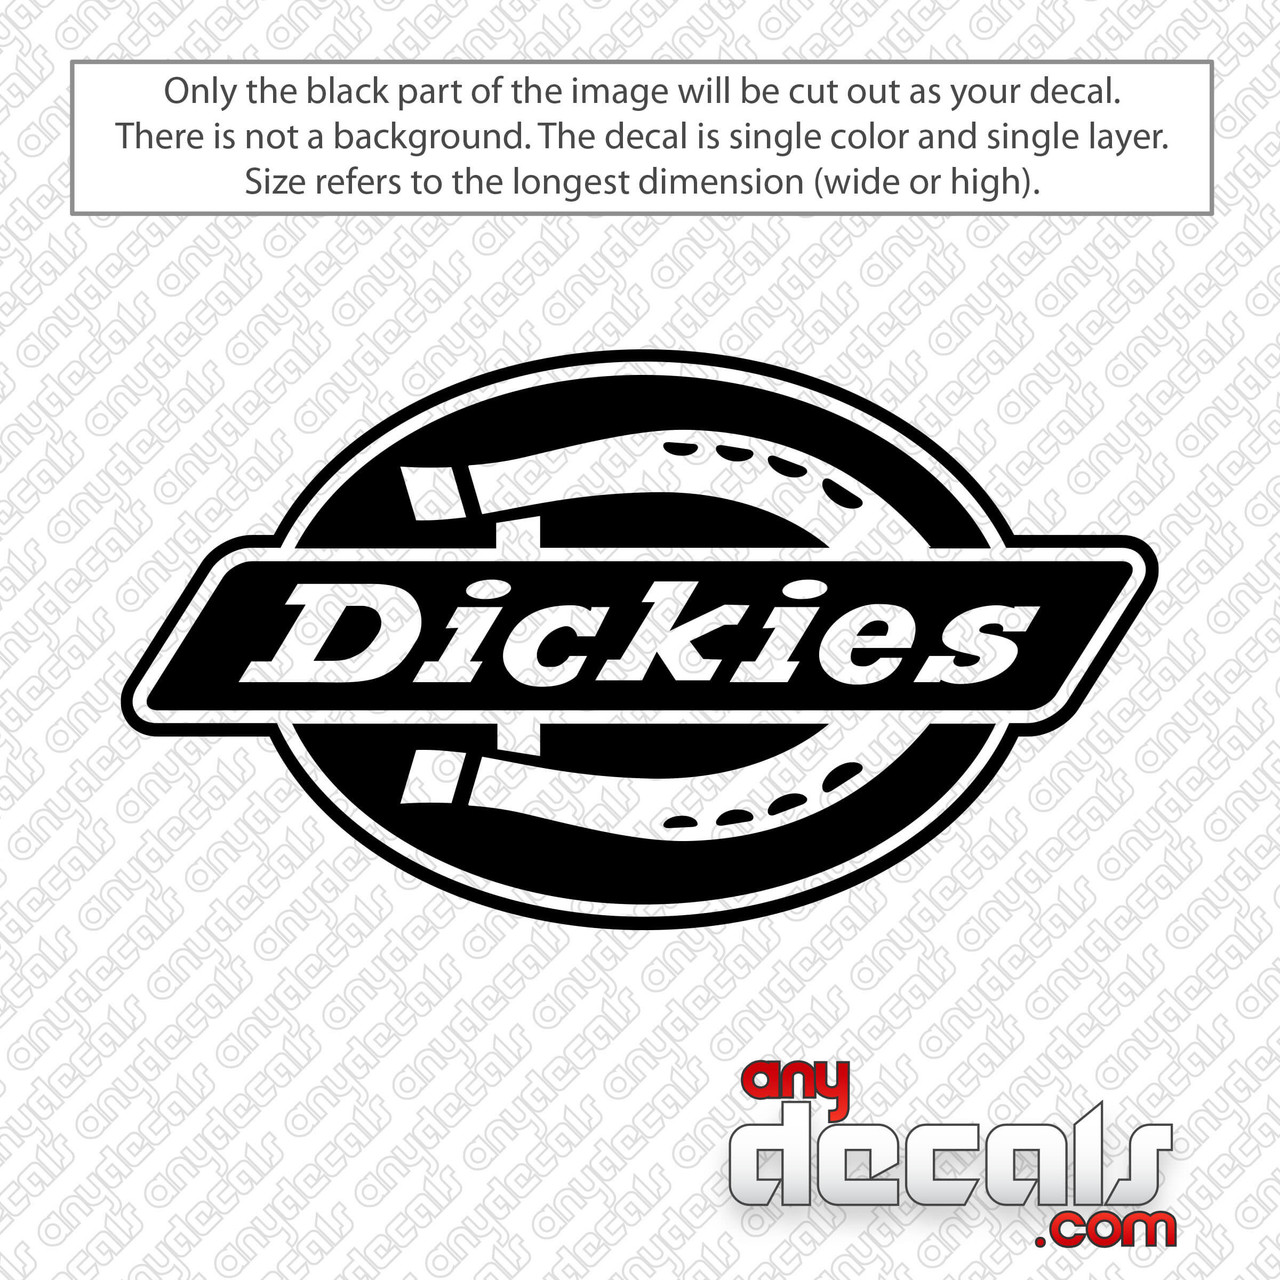 Dickies Decal Sticker AnyDecals.com